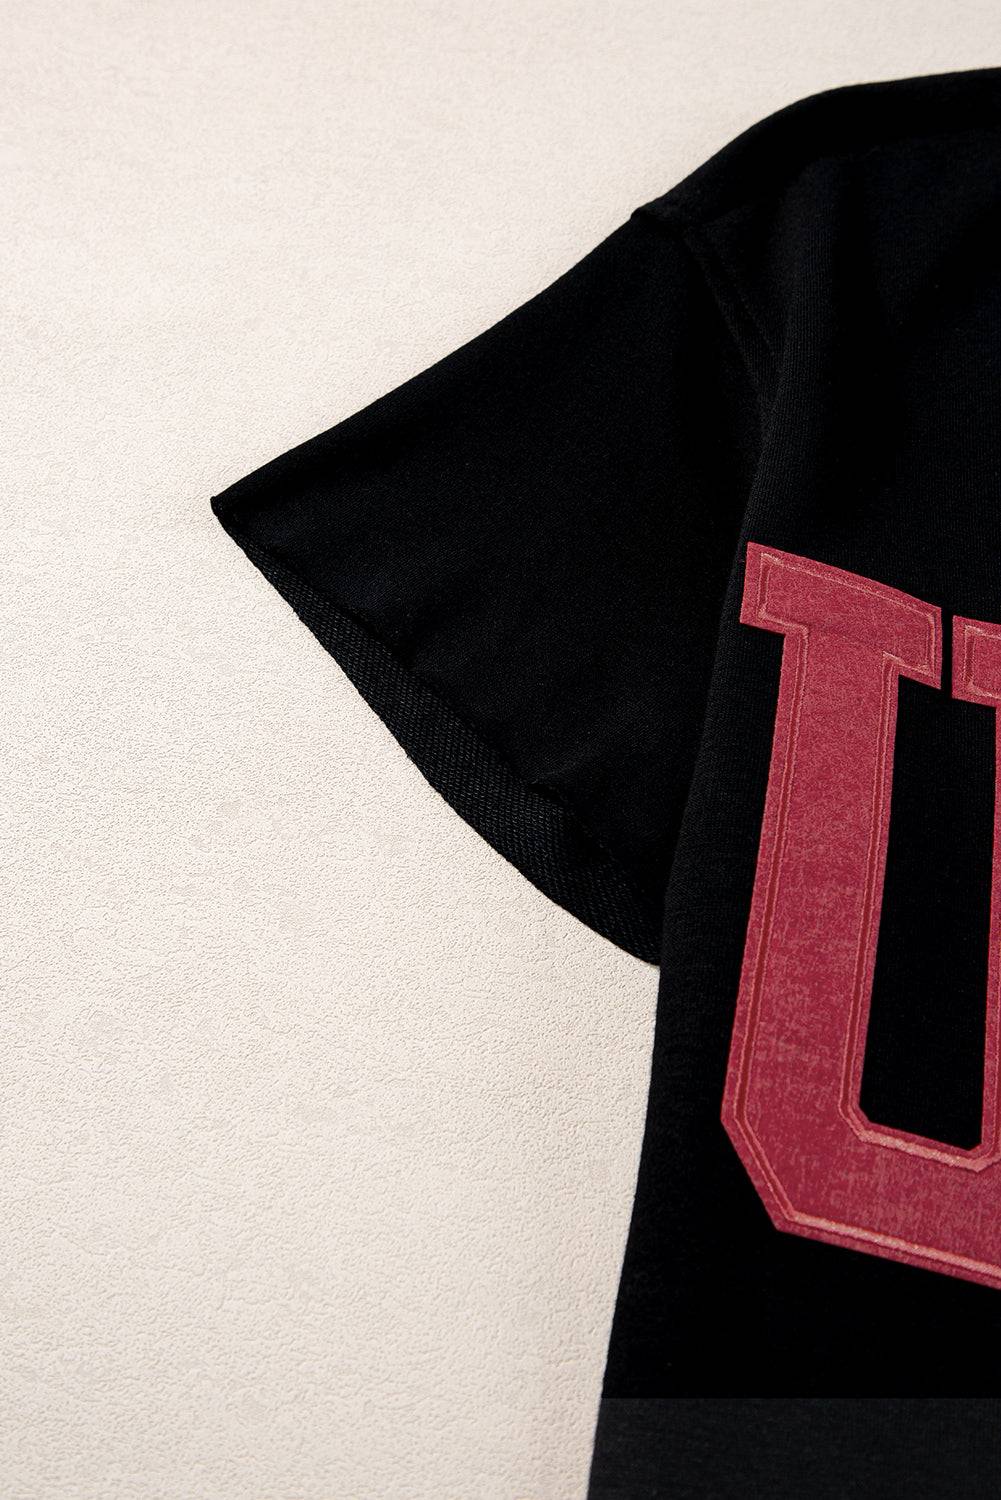 a black shirt with a red letter on it